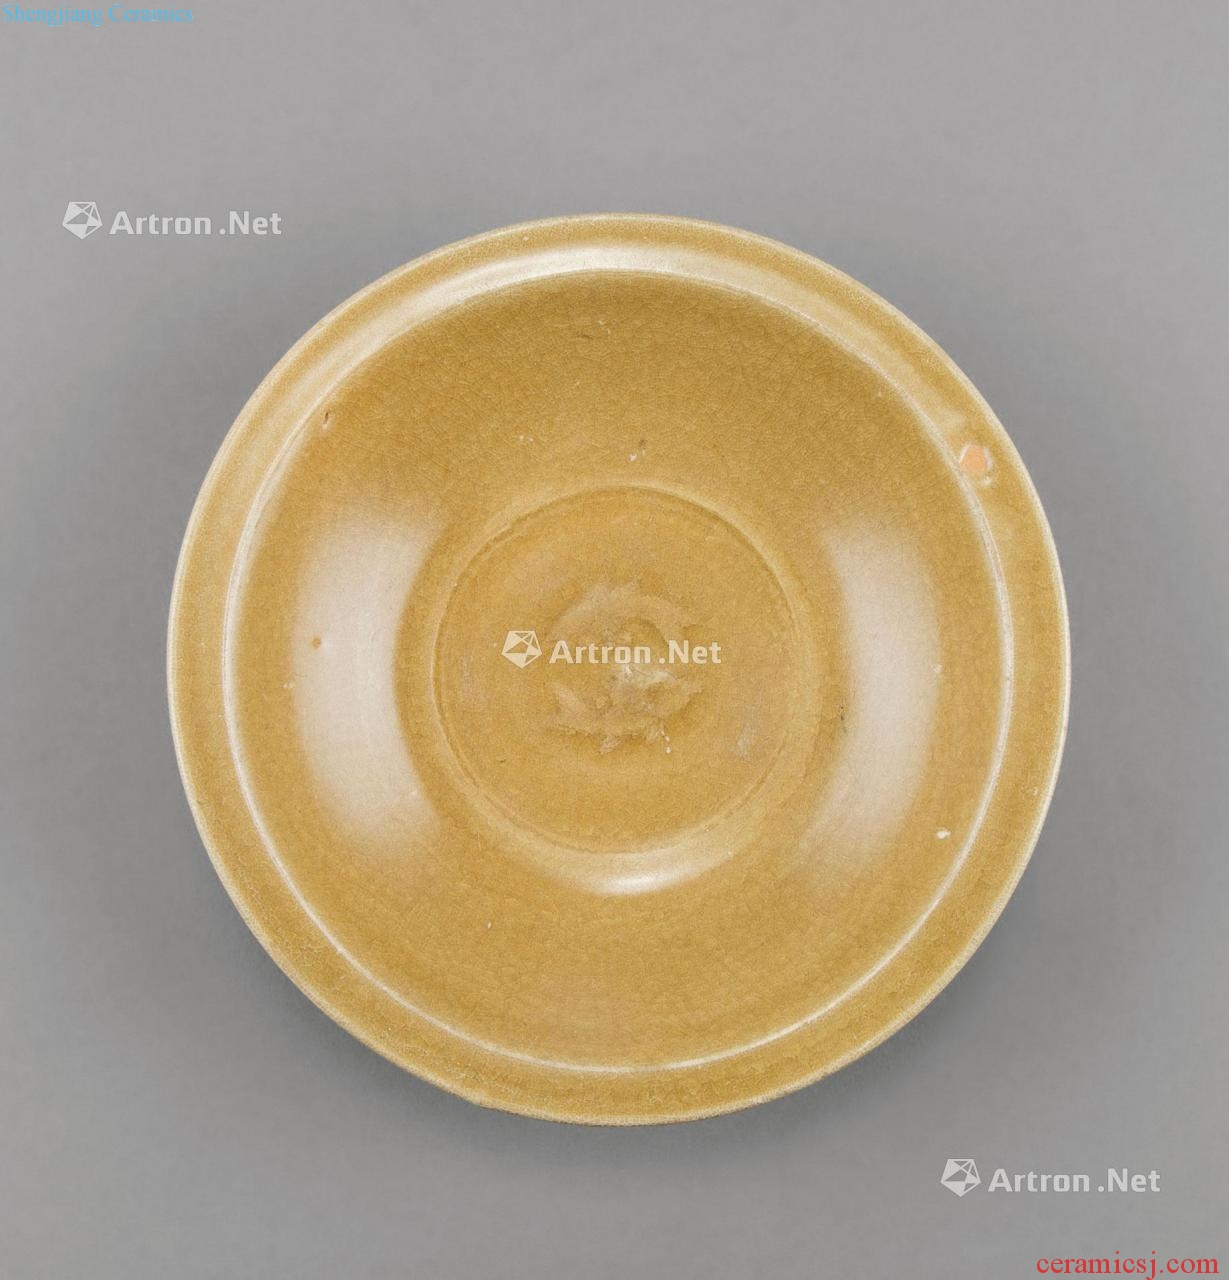 The song dynasty - the yuan dynasty Longquan celadon Pisces tray